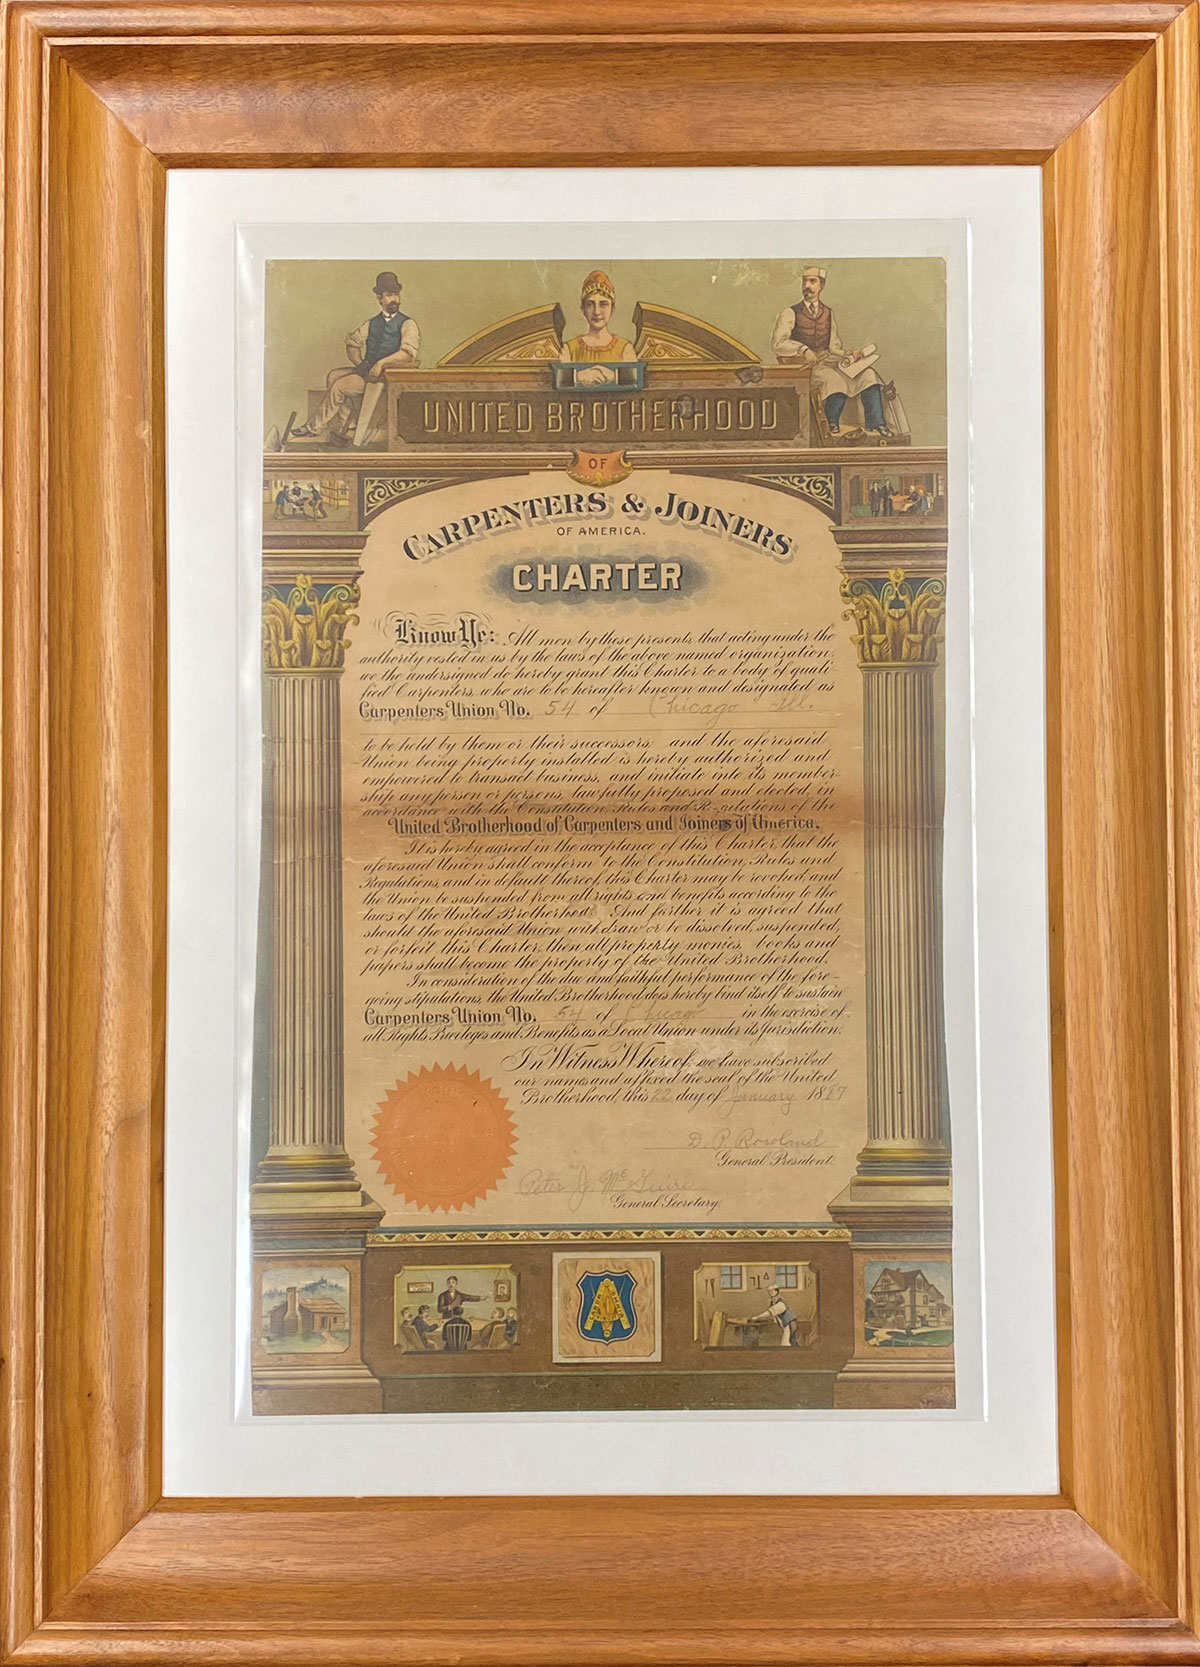 Carpenters & Joiners of America charter